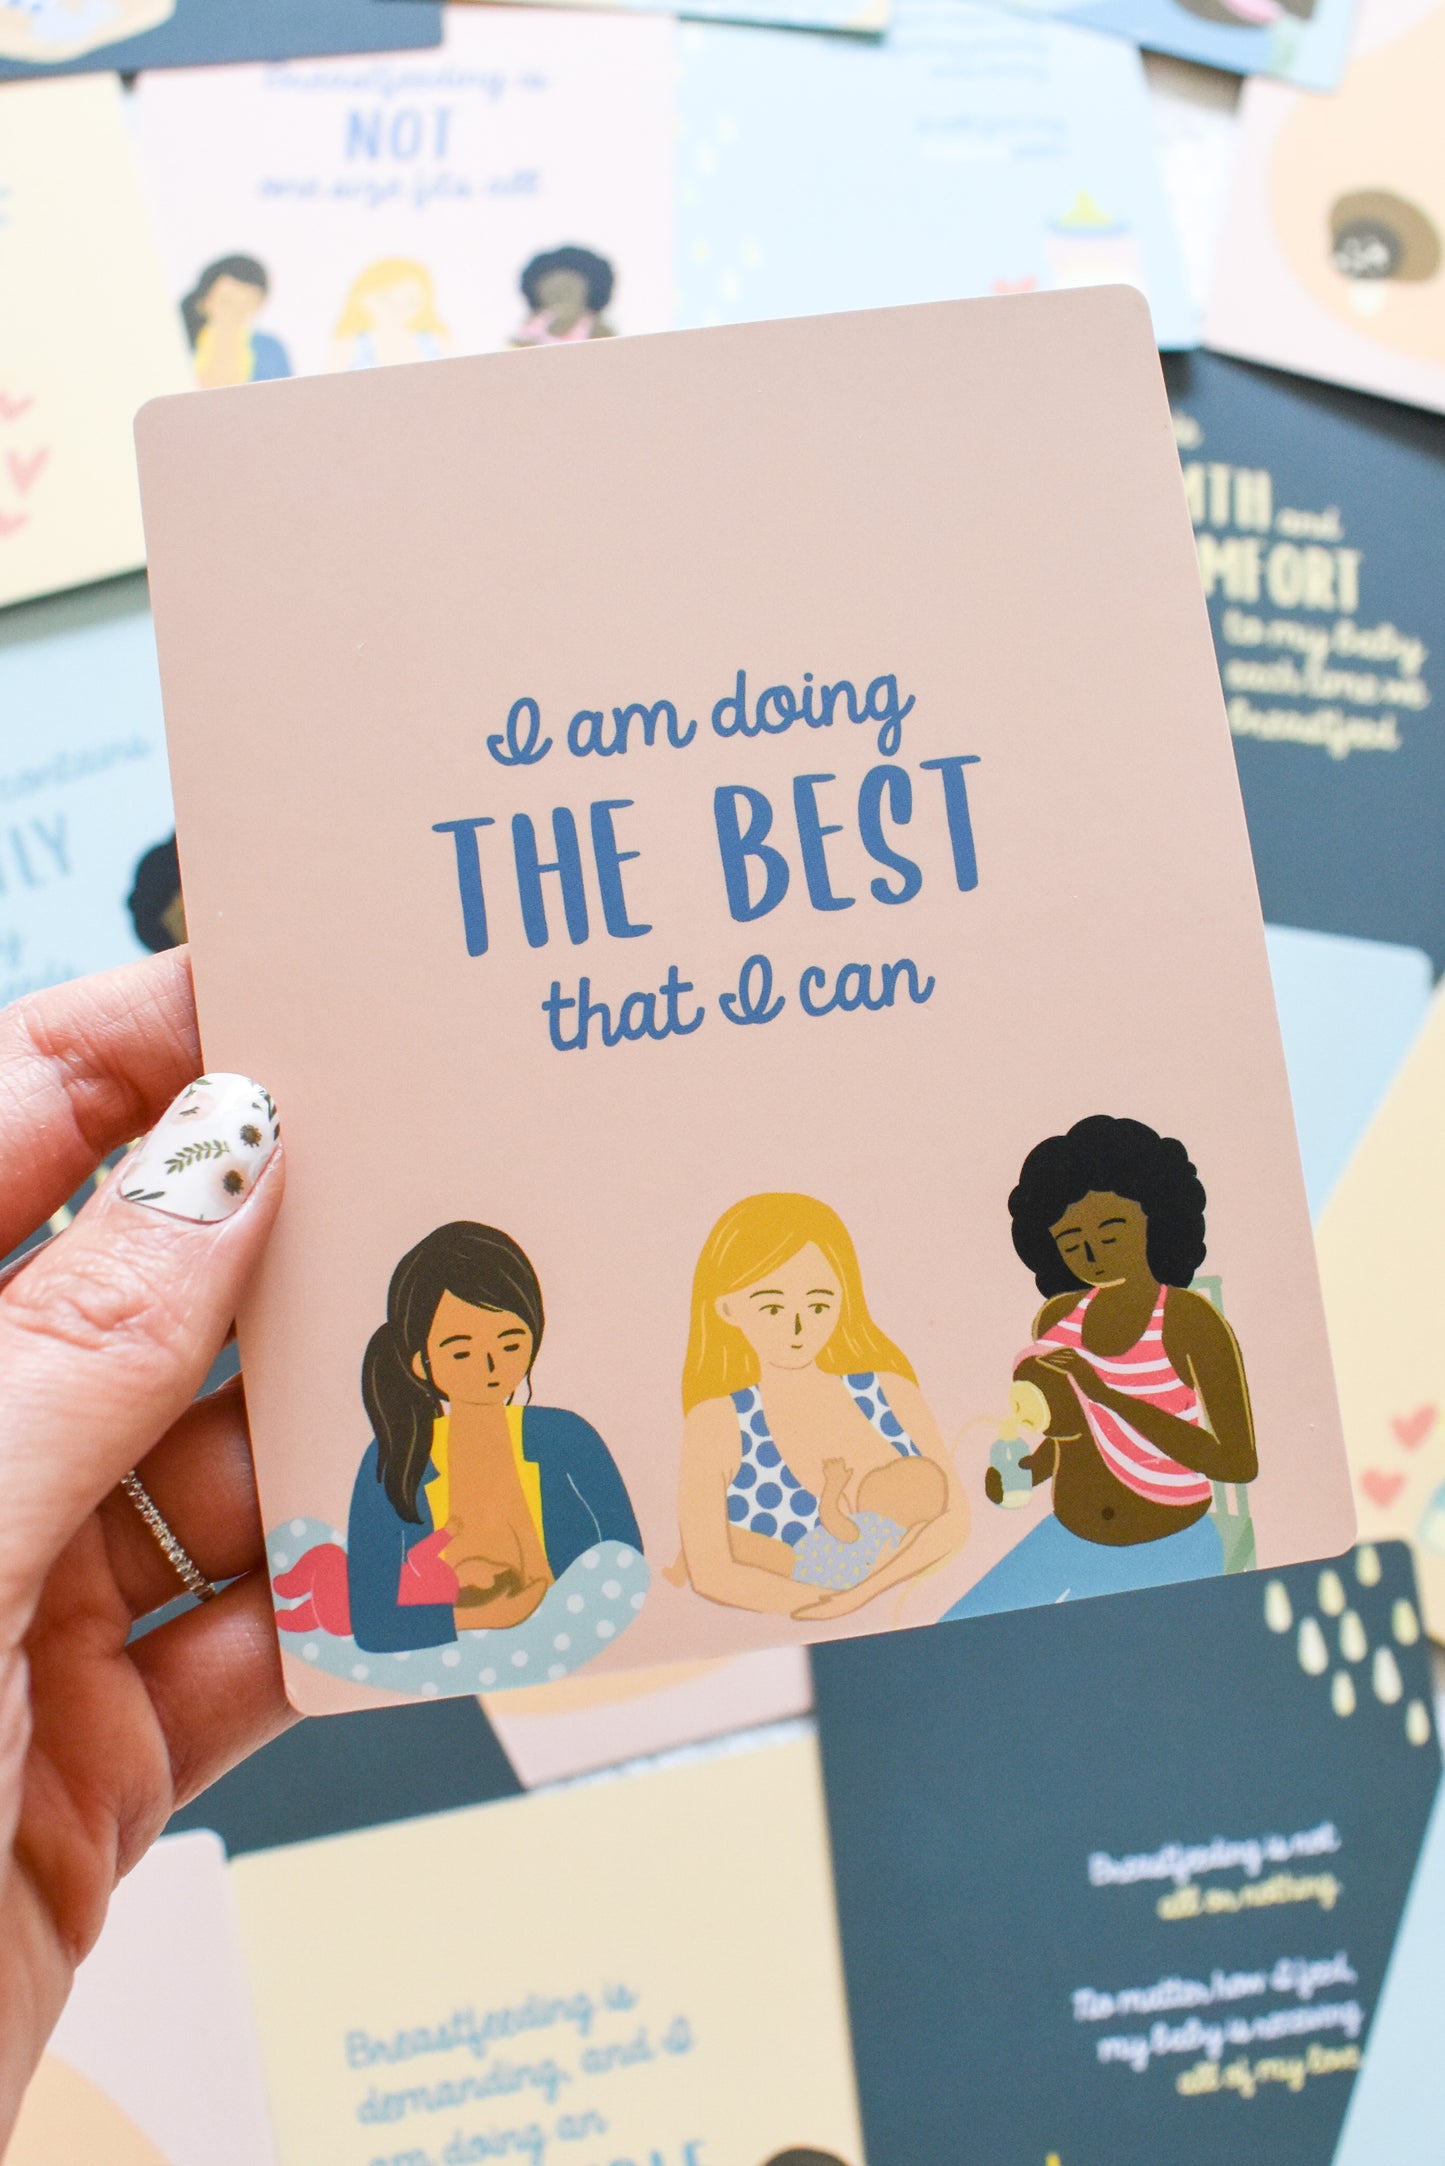 Breastfeeding affirmation card by Fourth Trimester Mama reads "I am doing the best that I can"